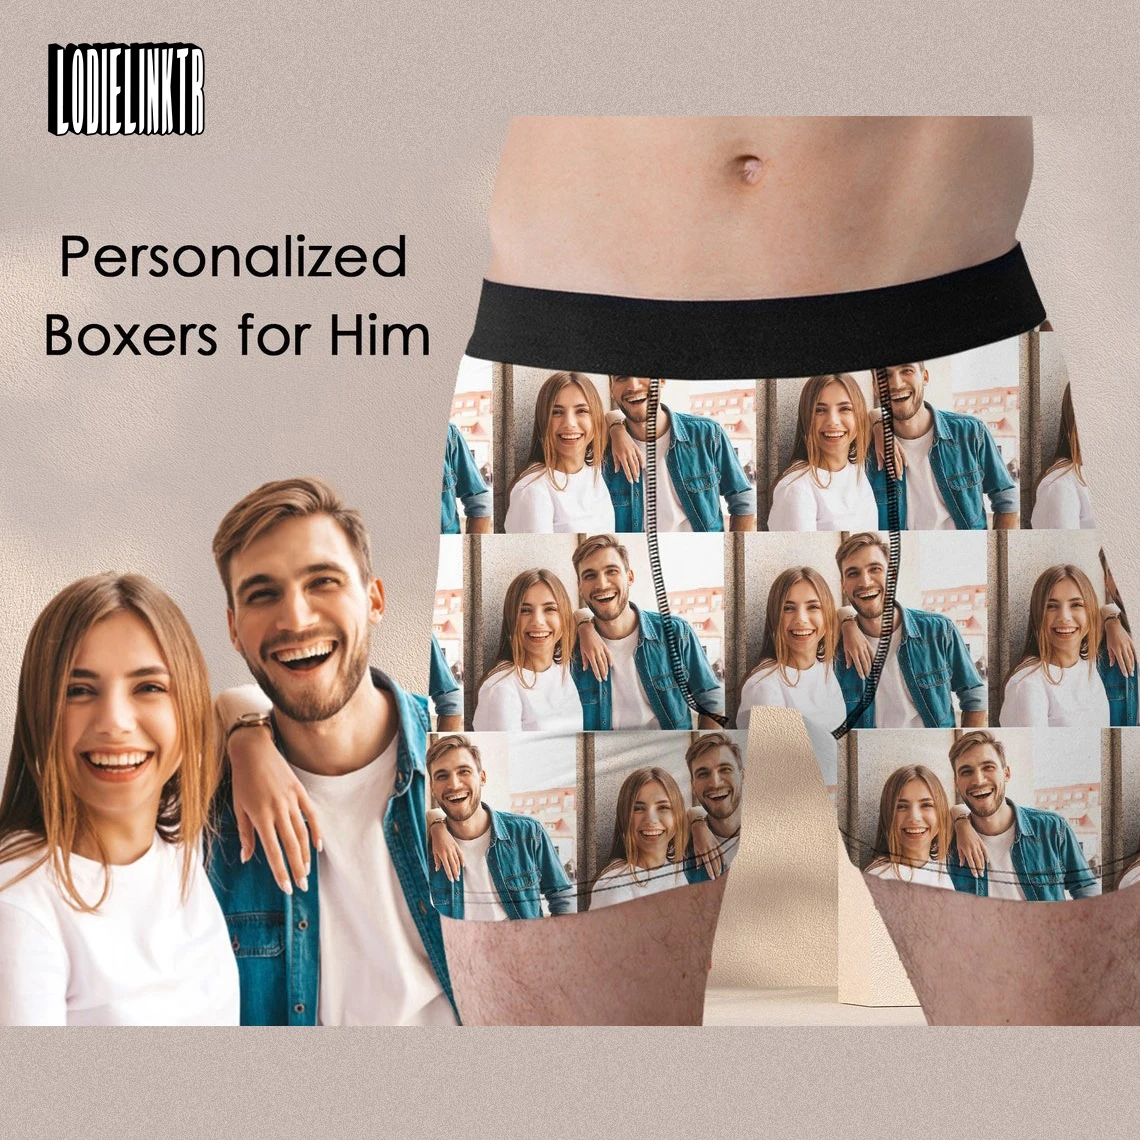 Custom Photo Collage Underwear Personalized Couple Family Picture On Boxers Birthday/Anniversary/Wedding/Valentine's Day Gifts assorted rose blossoms pattern pet stickers aesthetic room walls decorative collage material personalized photo album 30pcs pack